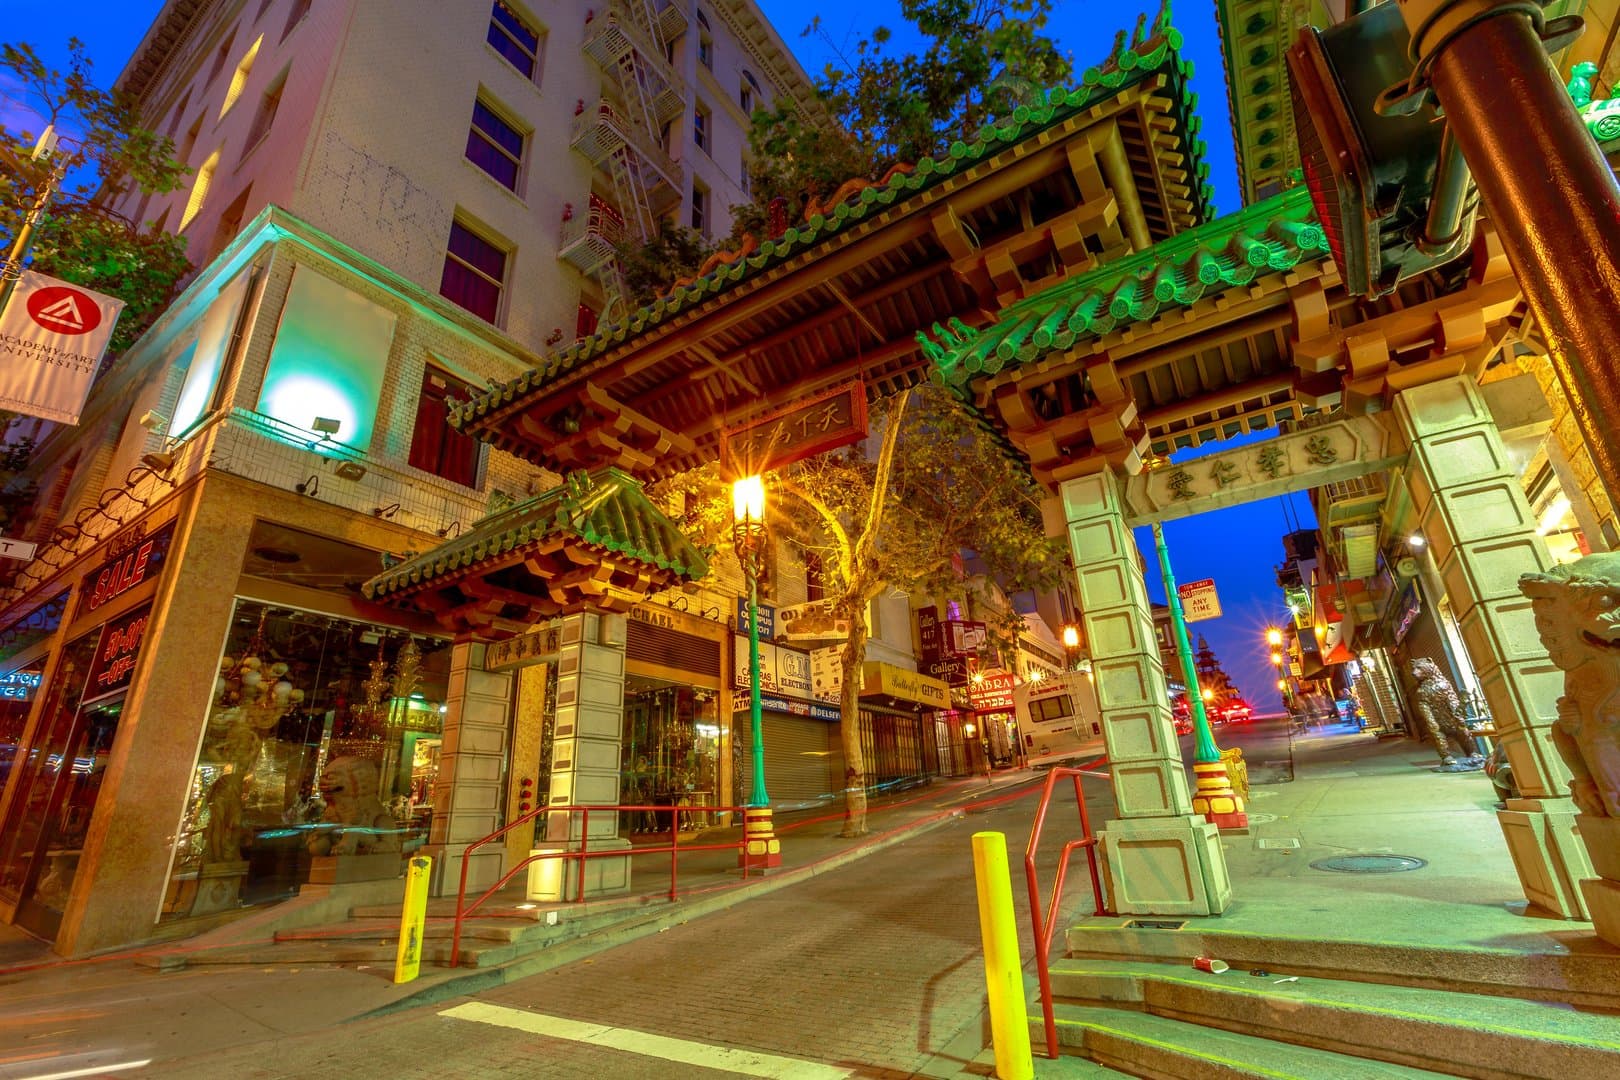 Free Tour Chinatown & Little Italy by Night San Francisco3